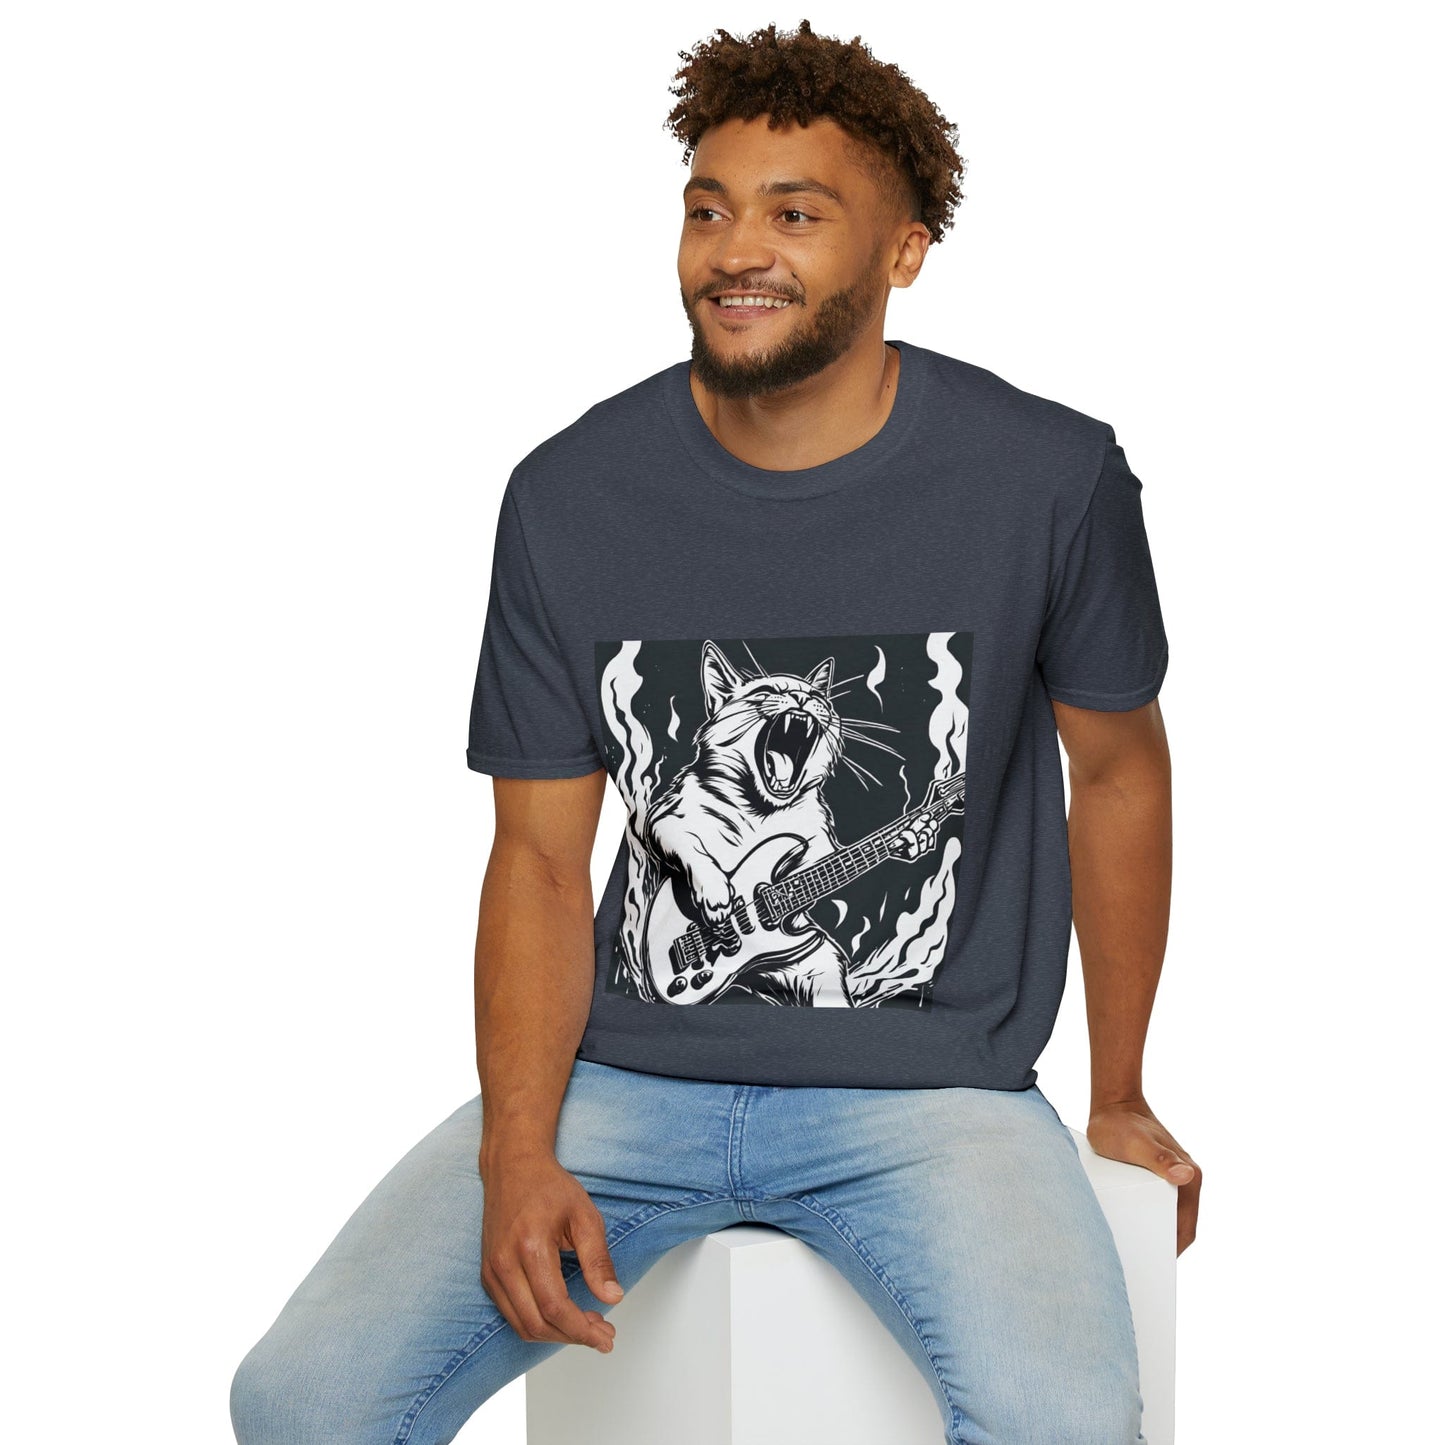 Cat Playing Guitar Tee A Funny Guitar Cat T-Shirt Perfect for Cat Lovers and Rock Lovers Alike Unisex Softstyle T-Shirt Flashlander